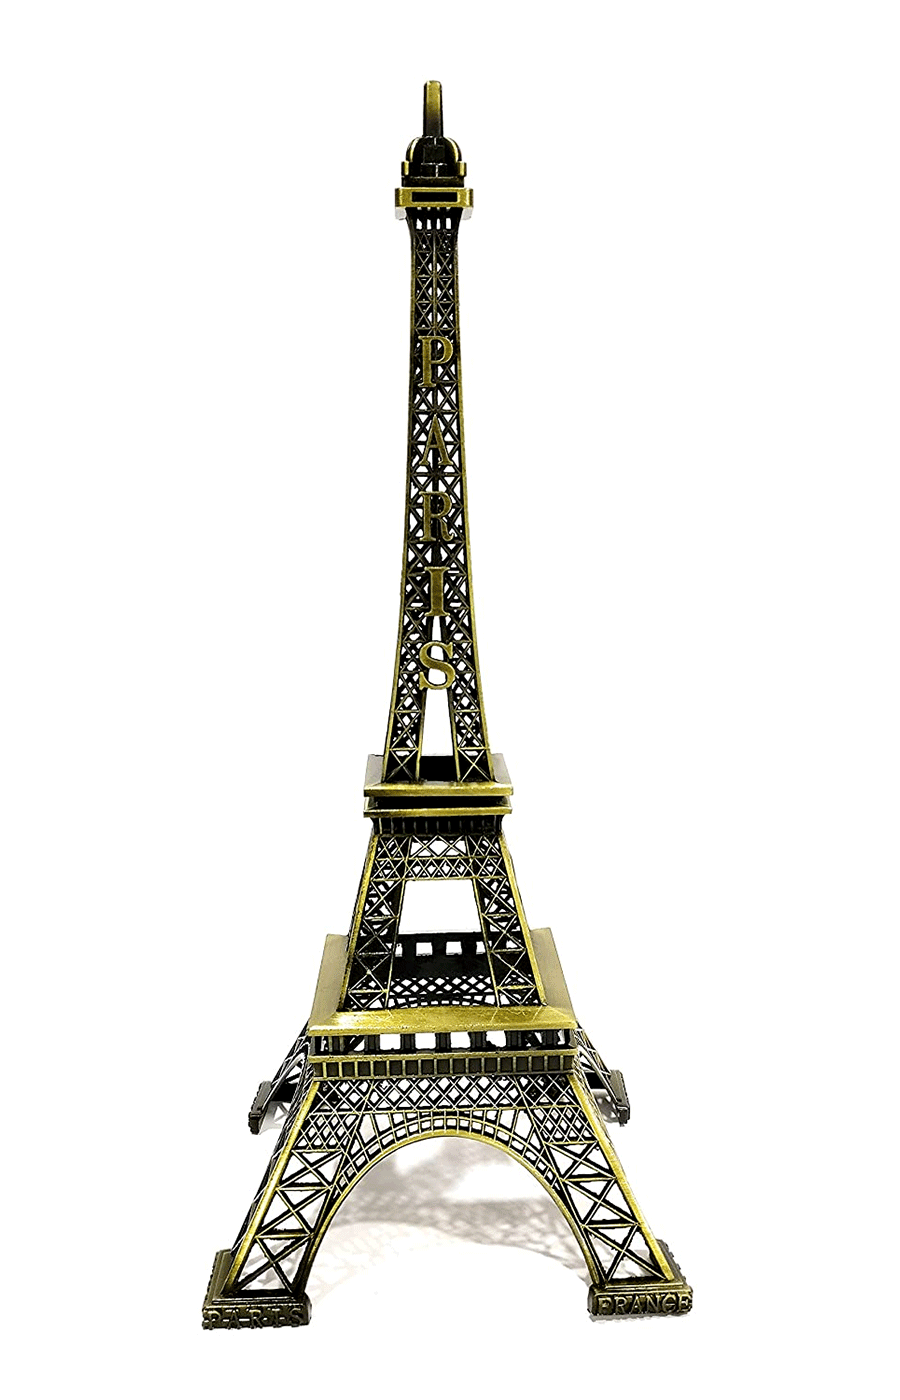 FunkyTradition 25 cm Tall Eiffel Tower Statue Metal Showpiece | Birthday Anniversary Gift and Home Office Decor 9.9" Tall